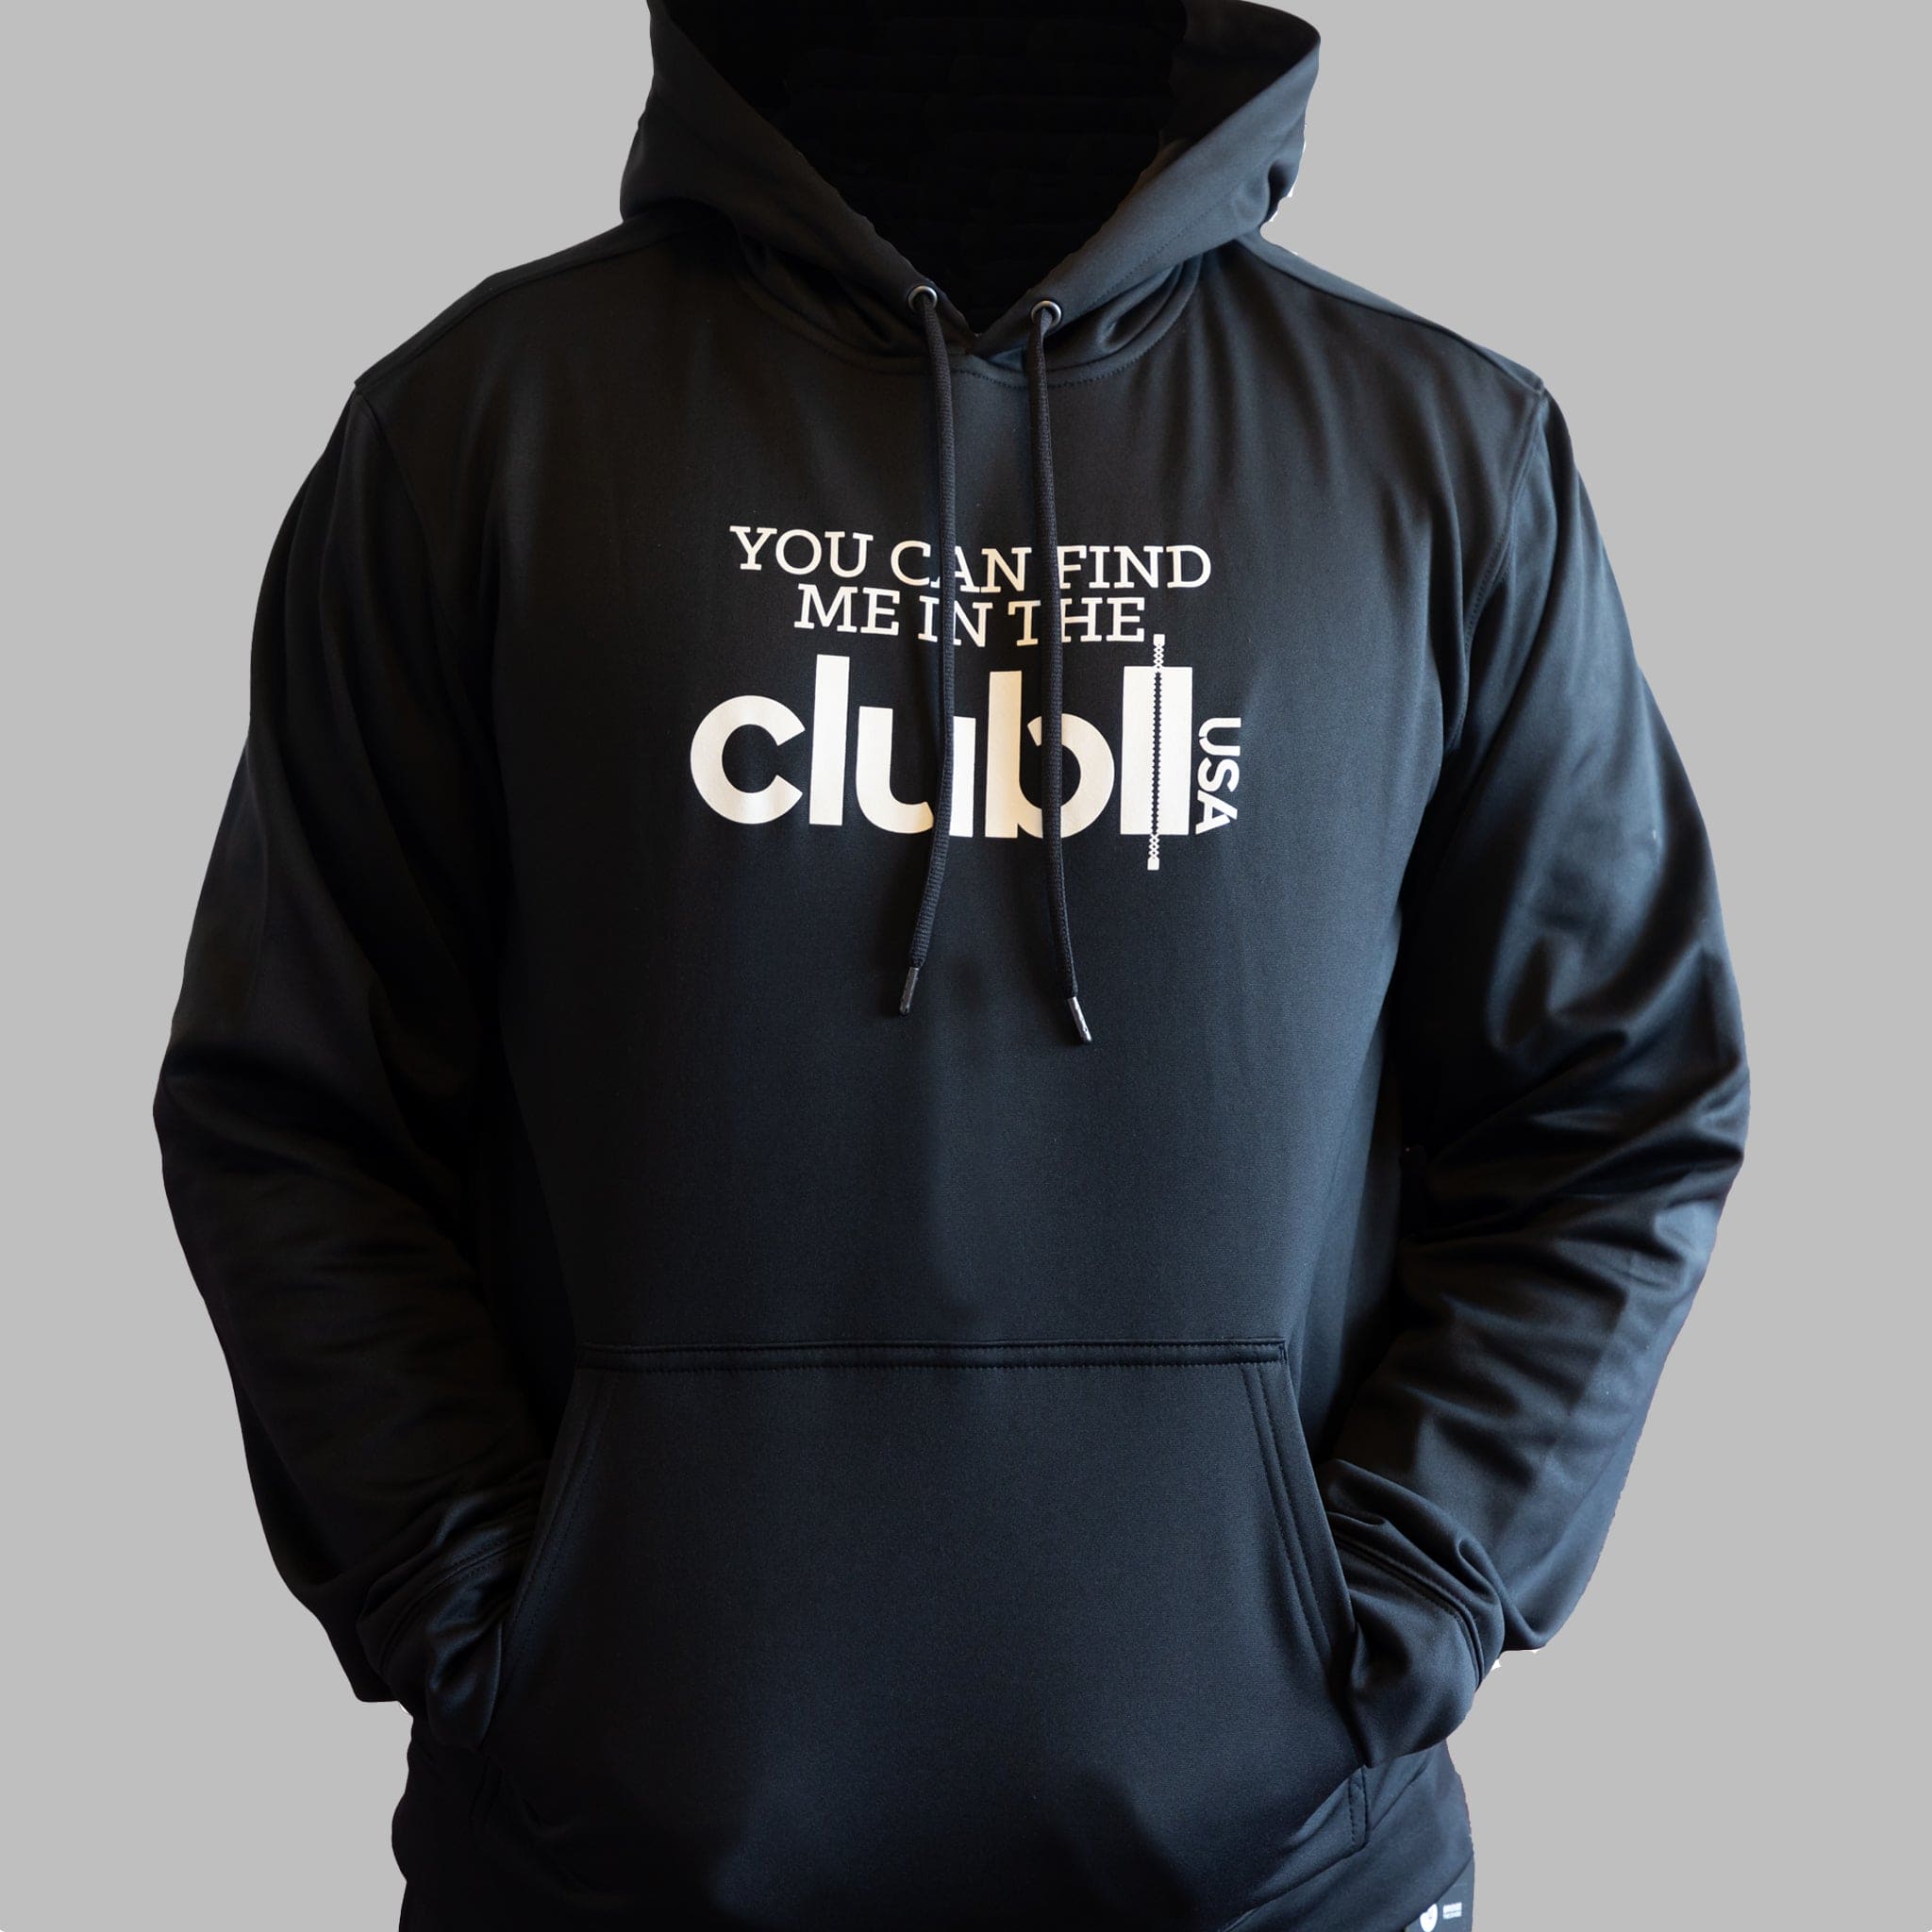 Club Hoodie - You can find me in the club